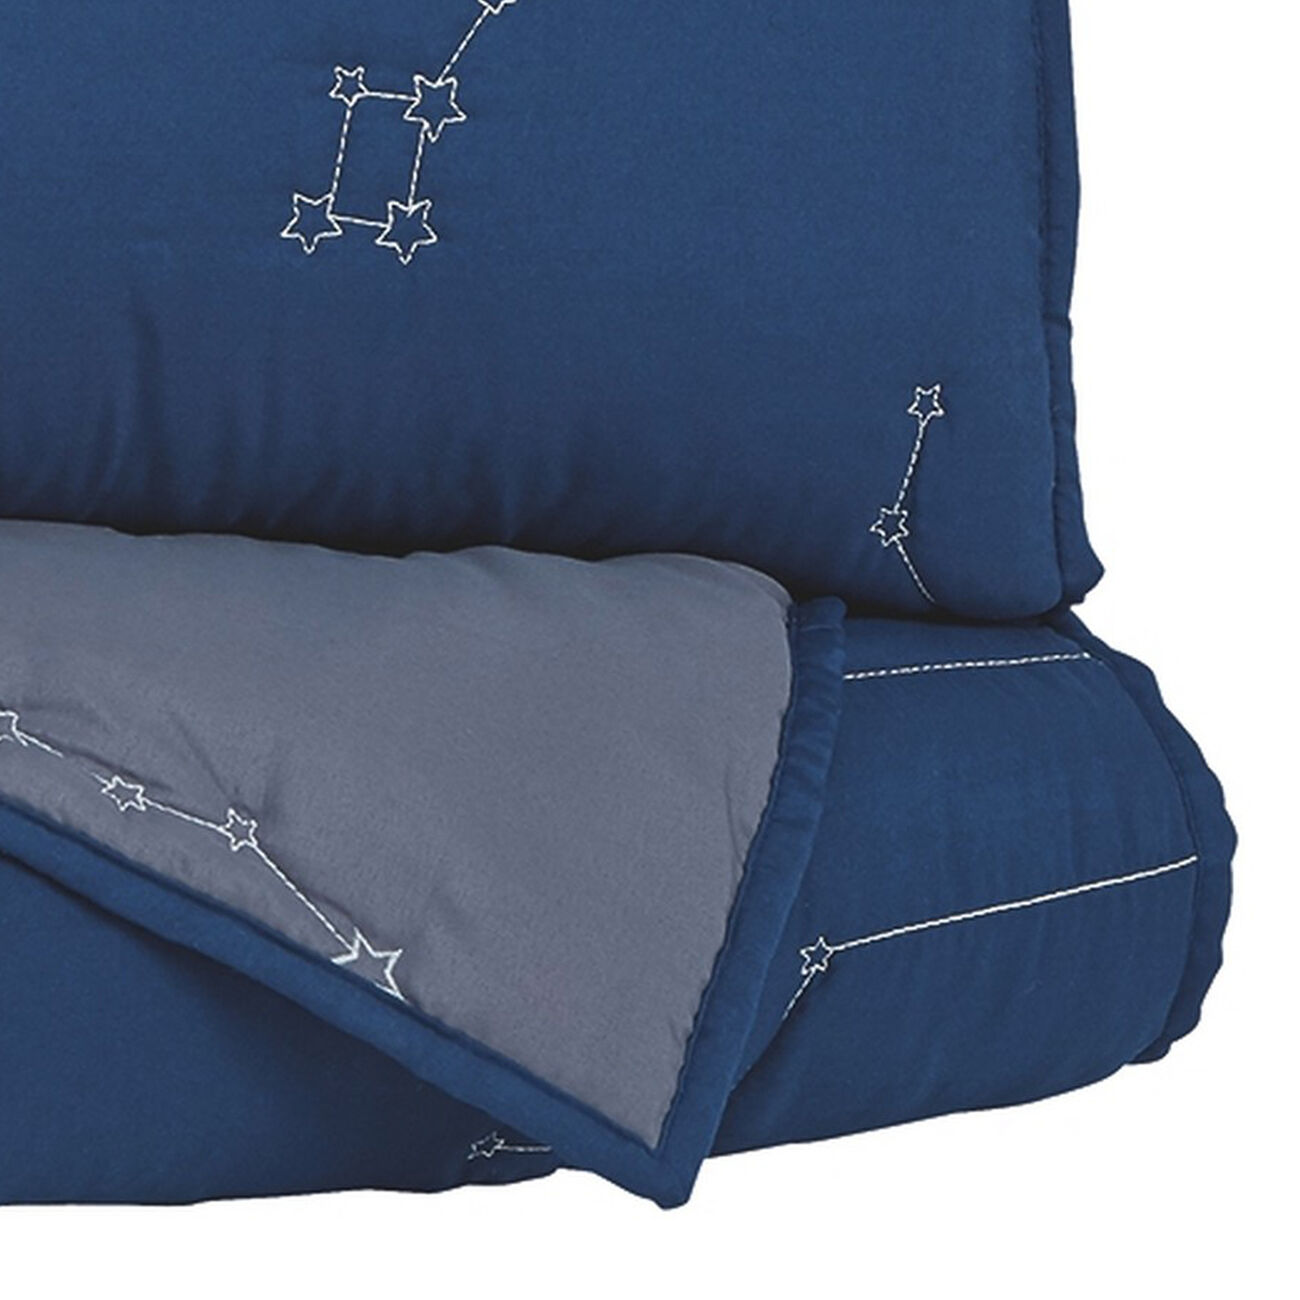 Constellation Theme Twin Size Fabric Comforter set with 1 Sham, Blue